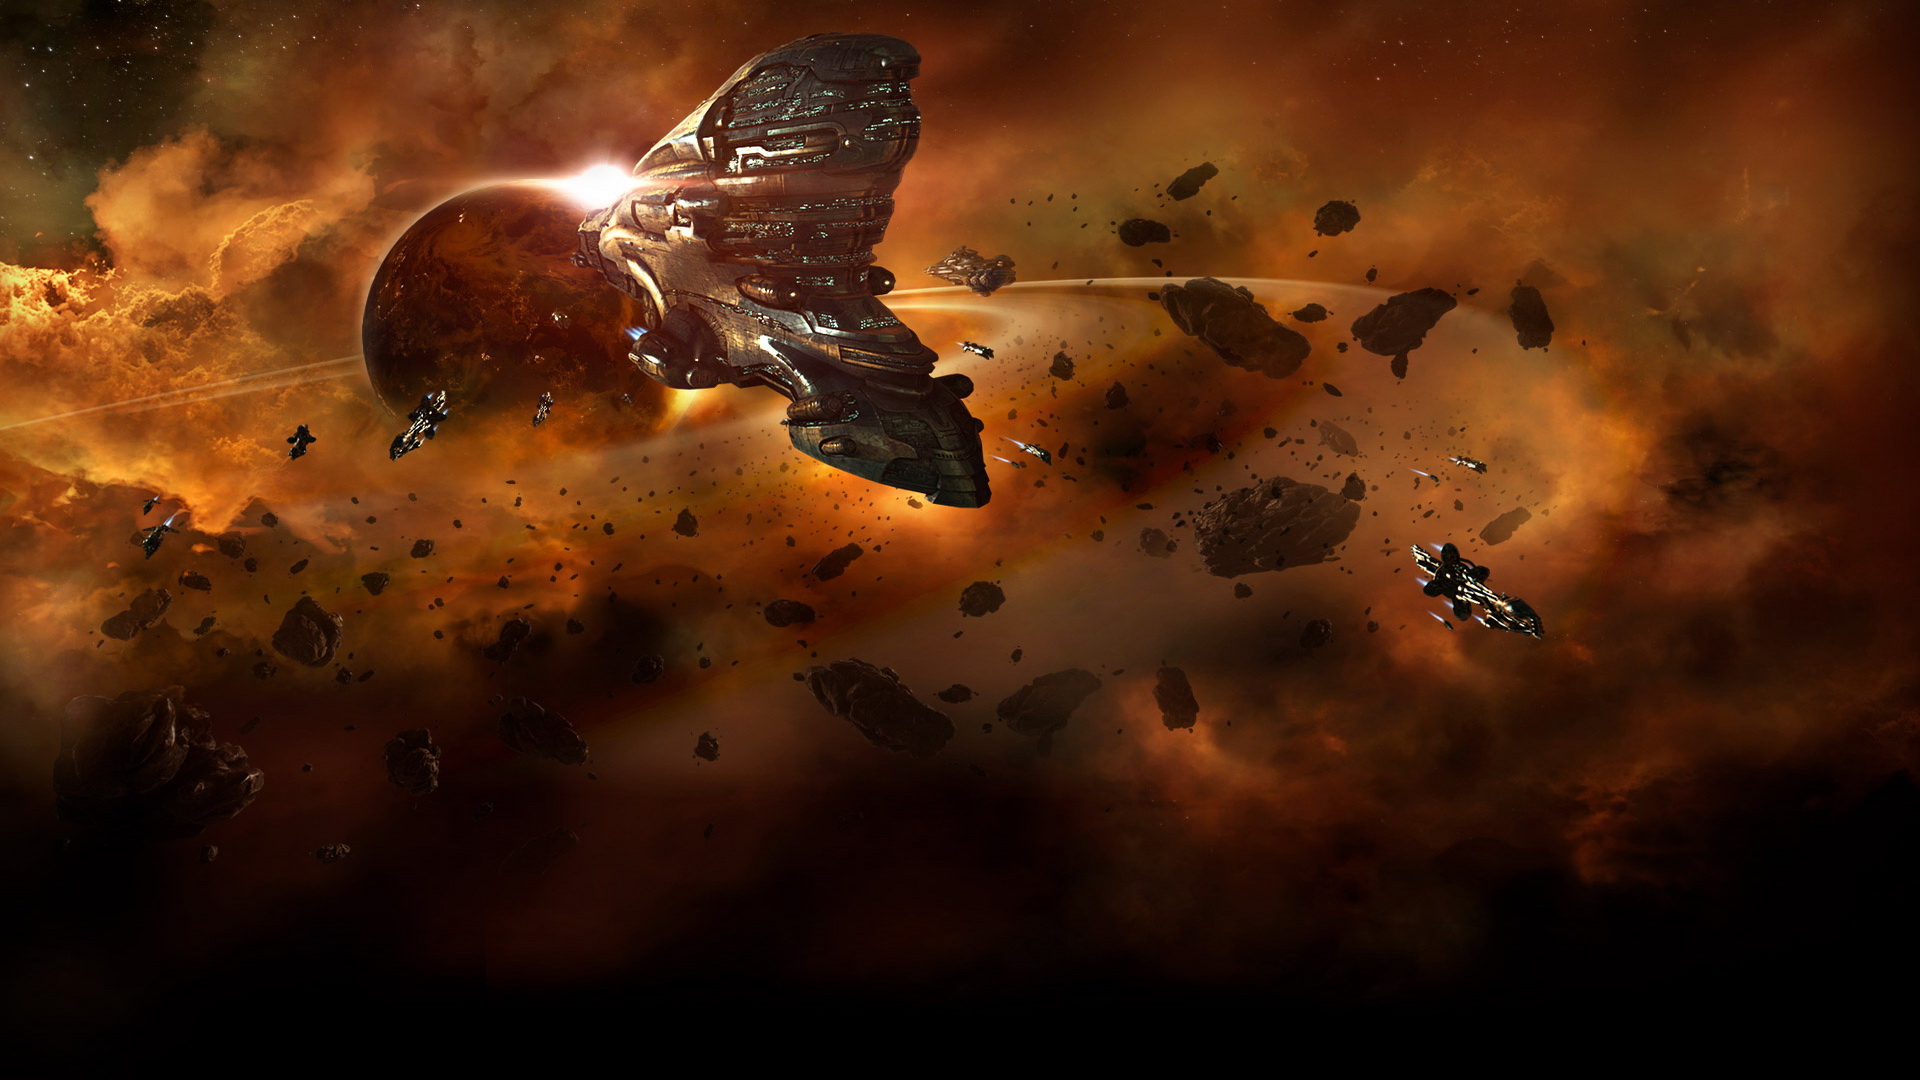 Game HD Wallpaper Video Games 1080p Eve Online